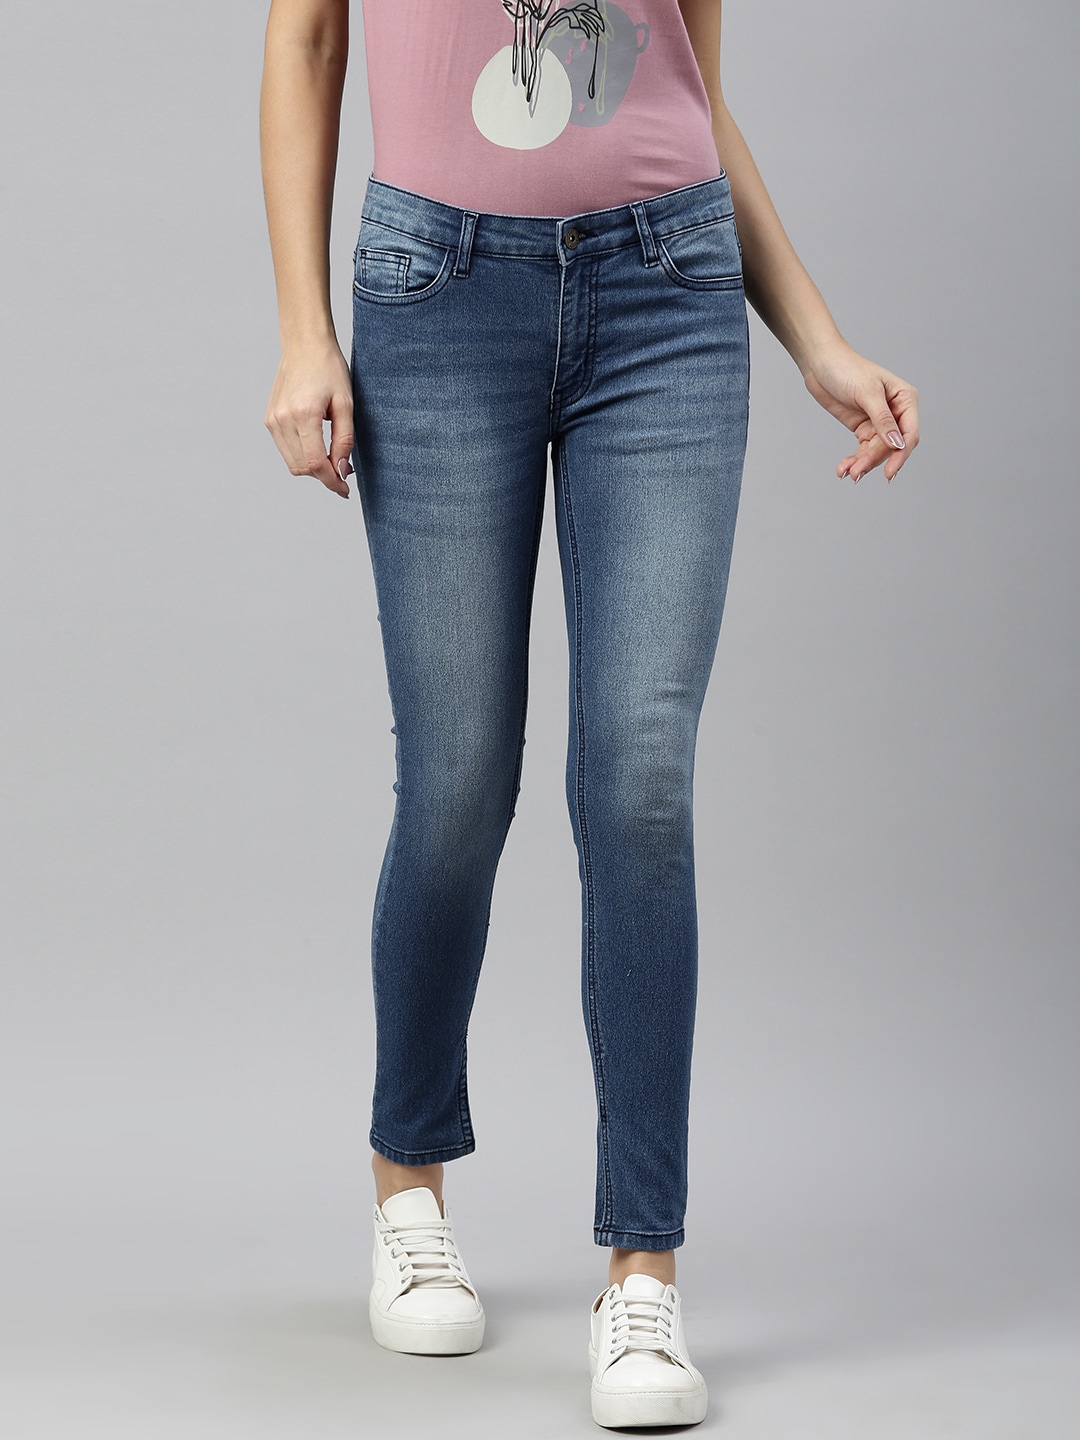 abof Women Blue Slim Fit Heavy Fade Stretchable Jeans Price in India